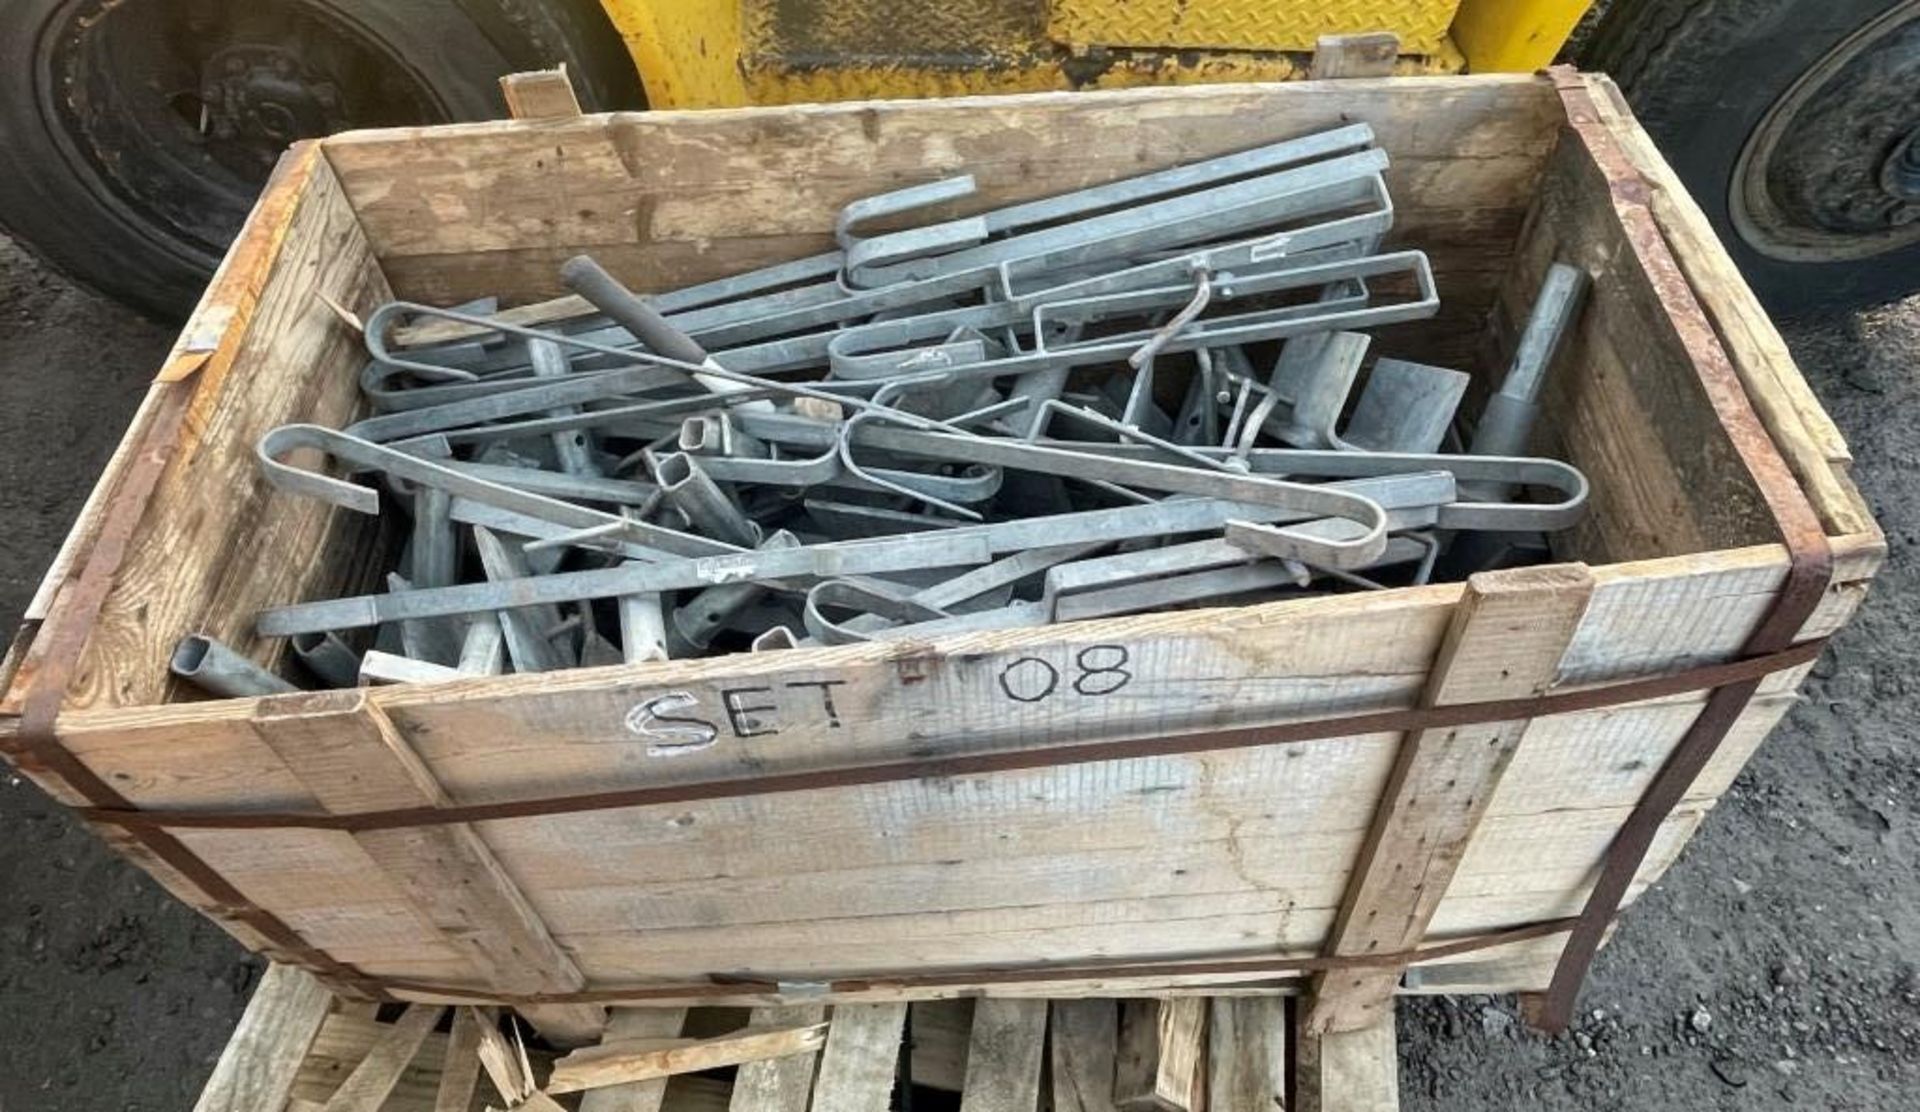 Various Cuplok scaffolding components - poles, planks, connectors - see pictures for more details - Image 21 of 38